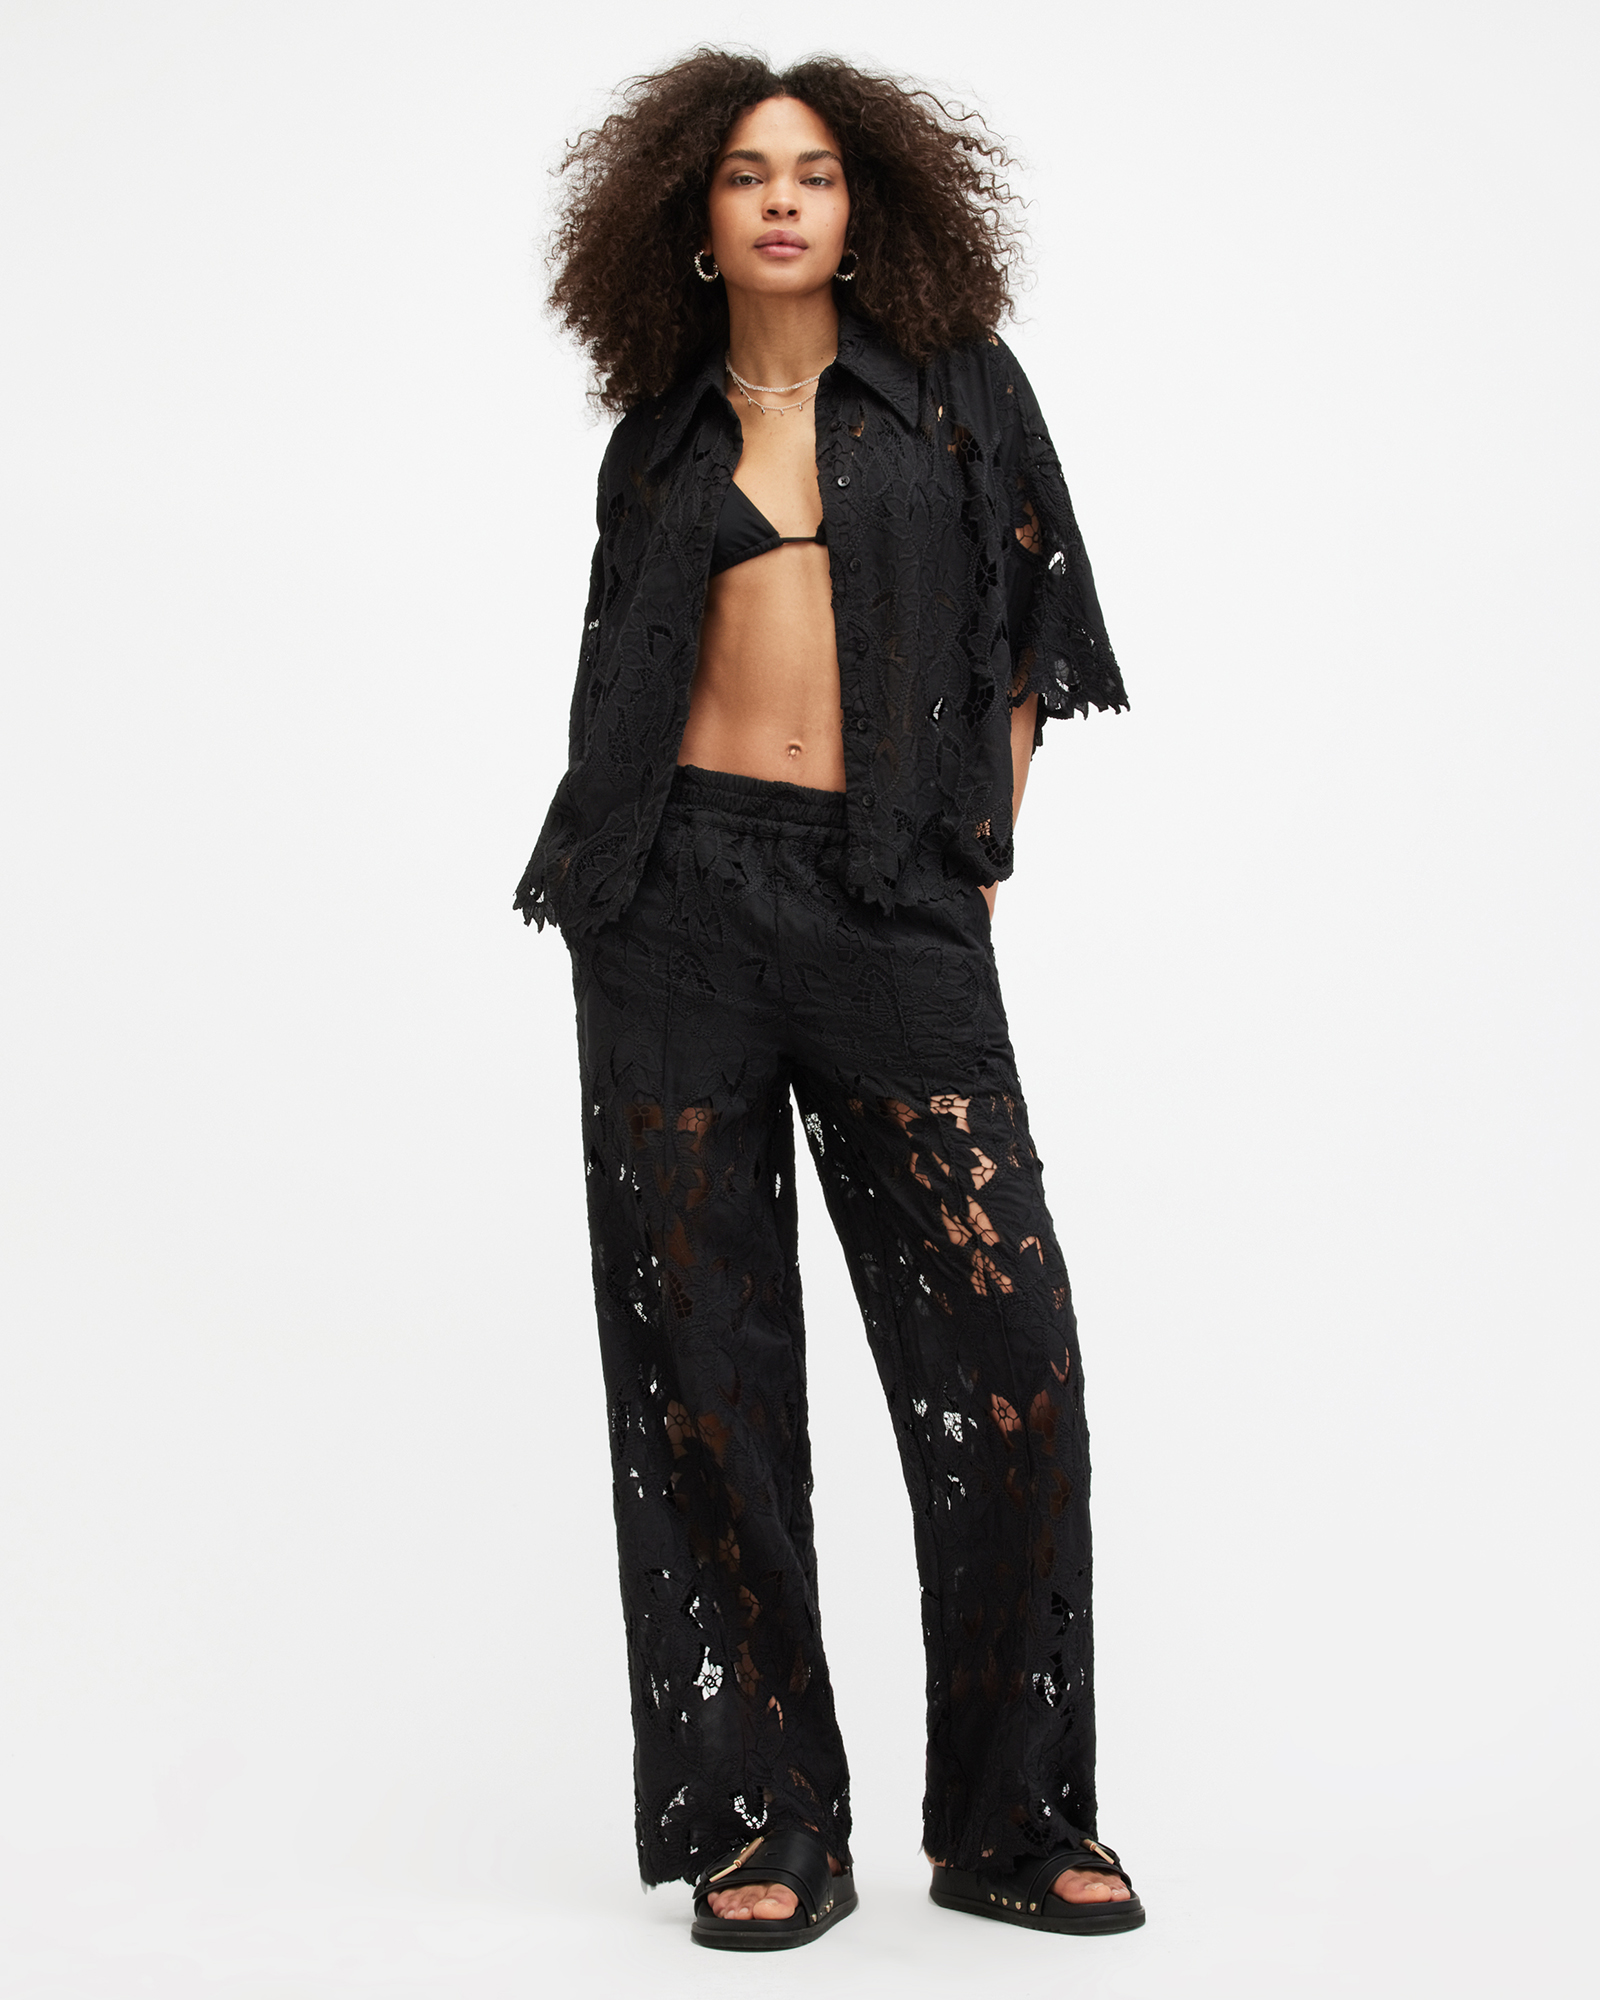 AllSaints Charli Embroidered Straight Fit Trousers,, Black, Size: UK